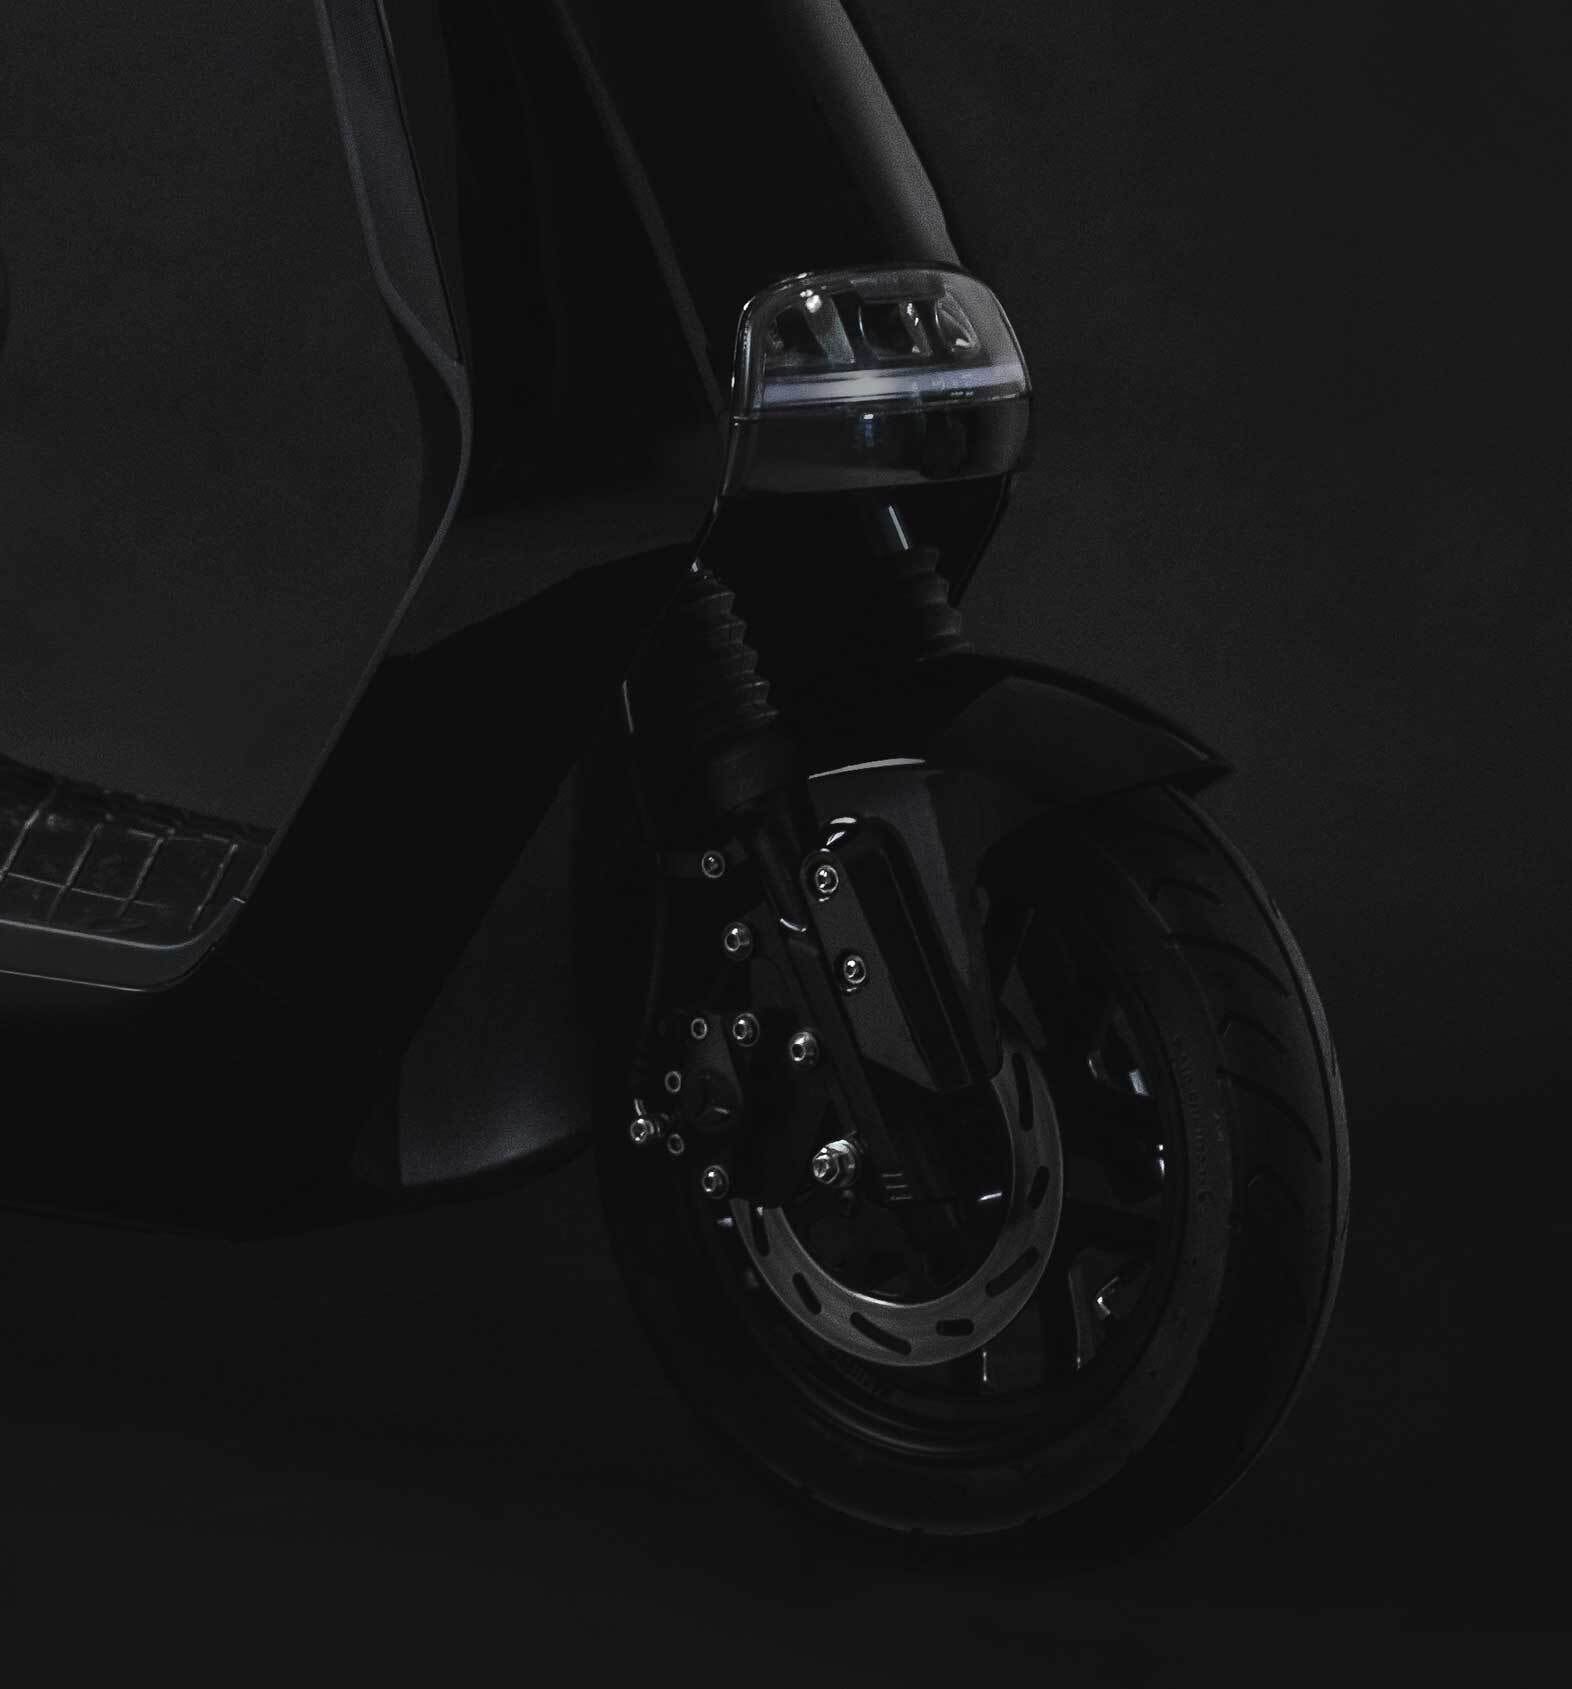 Dark image of the black Yadea e-moped zoomed in by the front wheel.